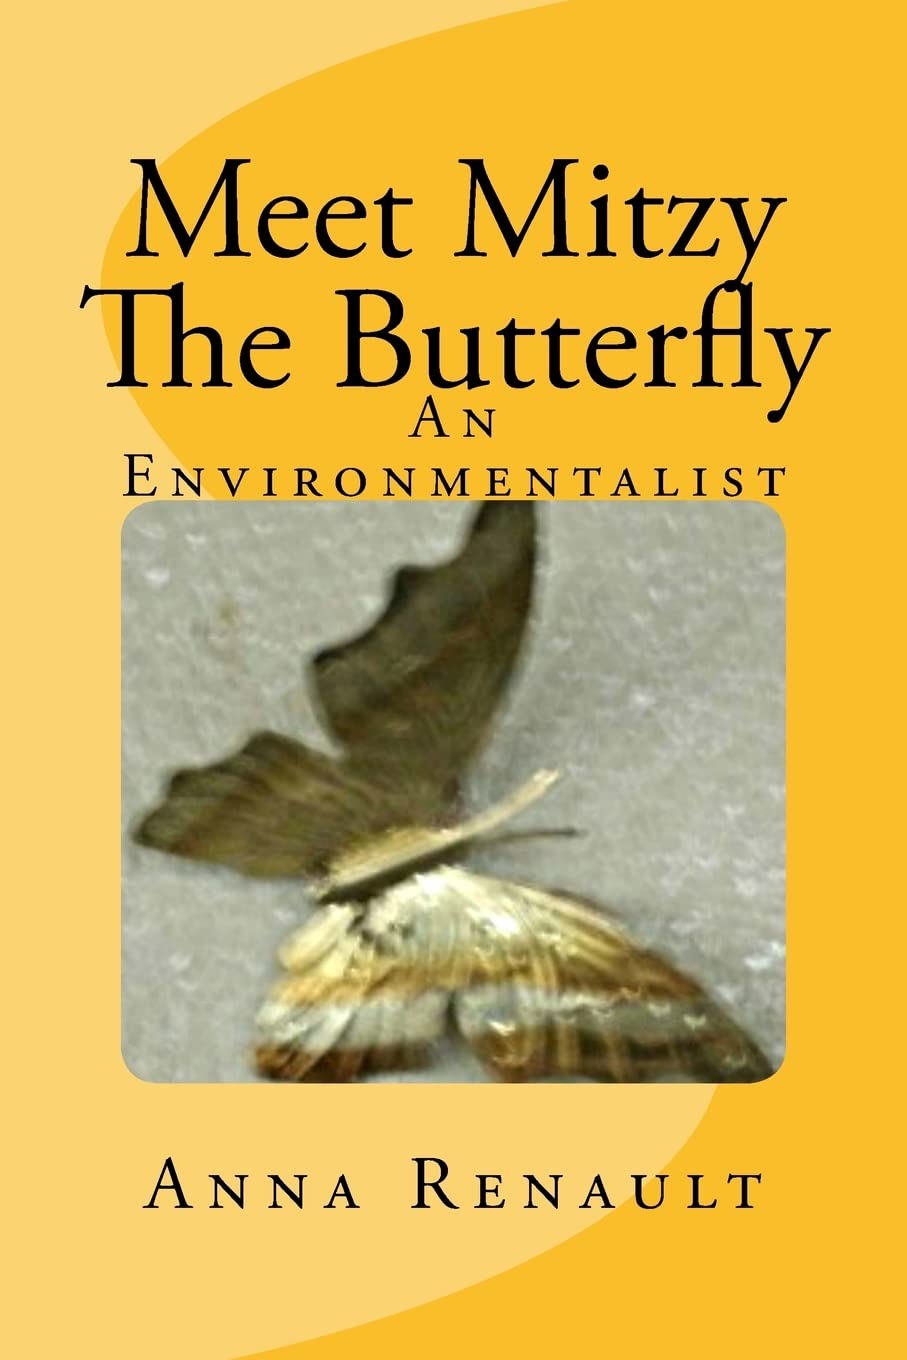 Meet Mitzy, the Butterfly (Mitzy the Environmentalist) (Volume 1)